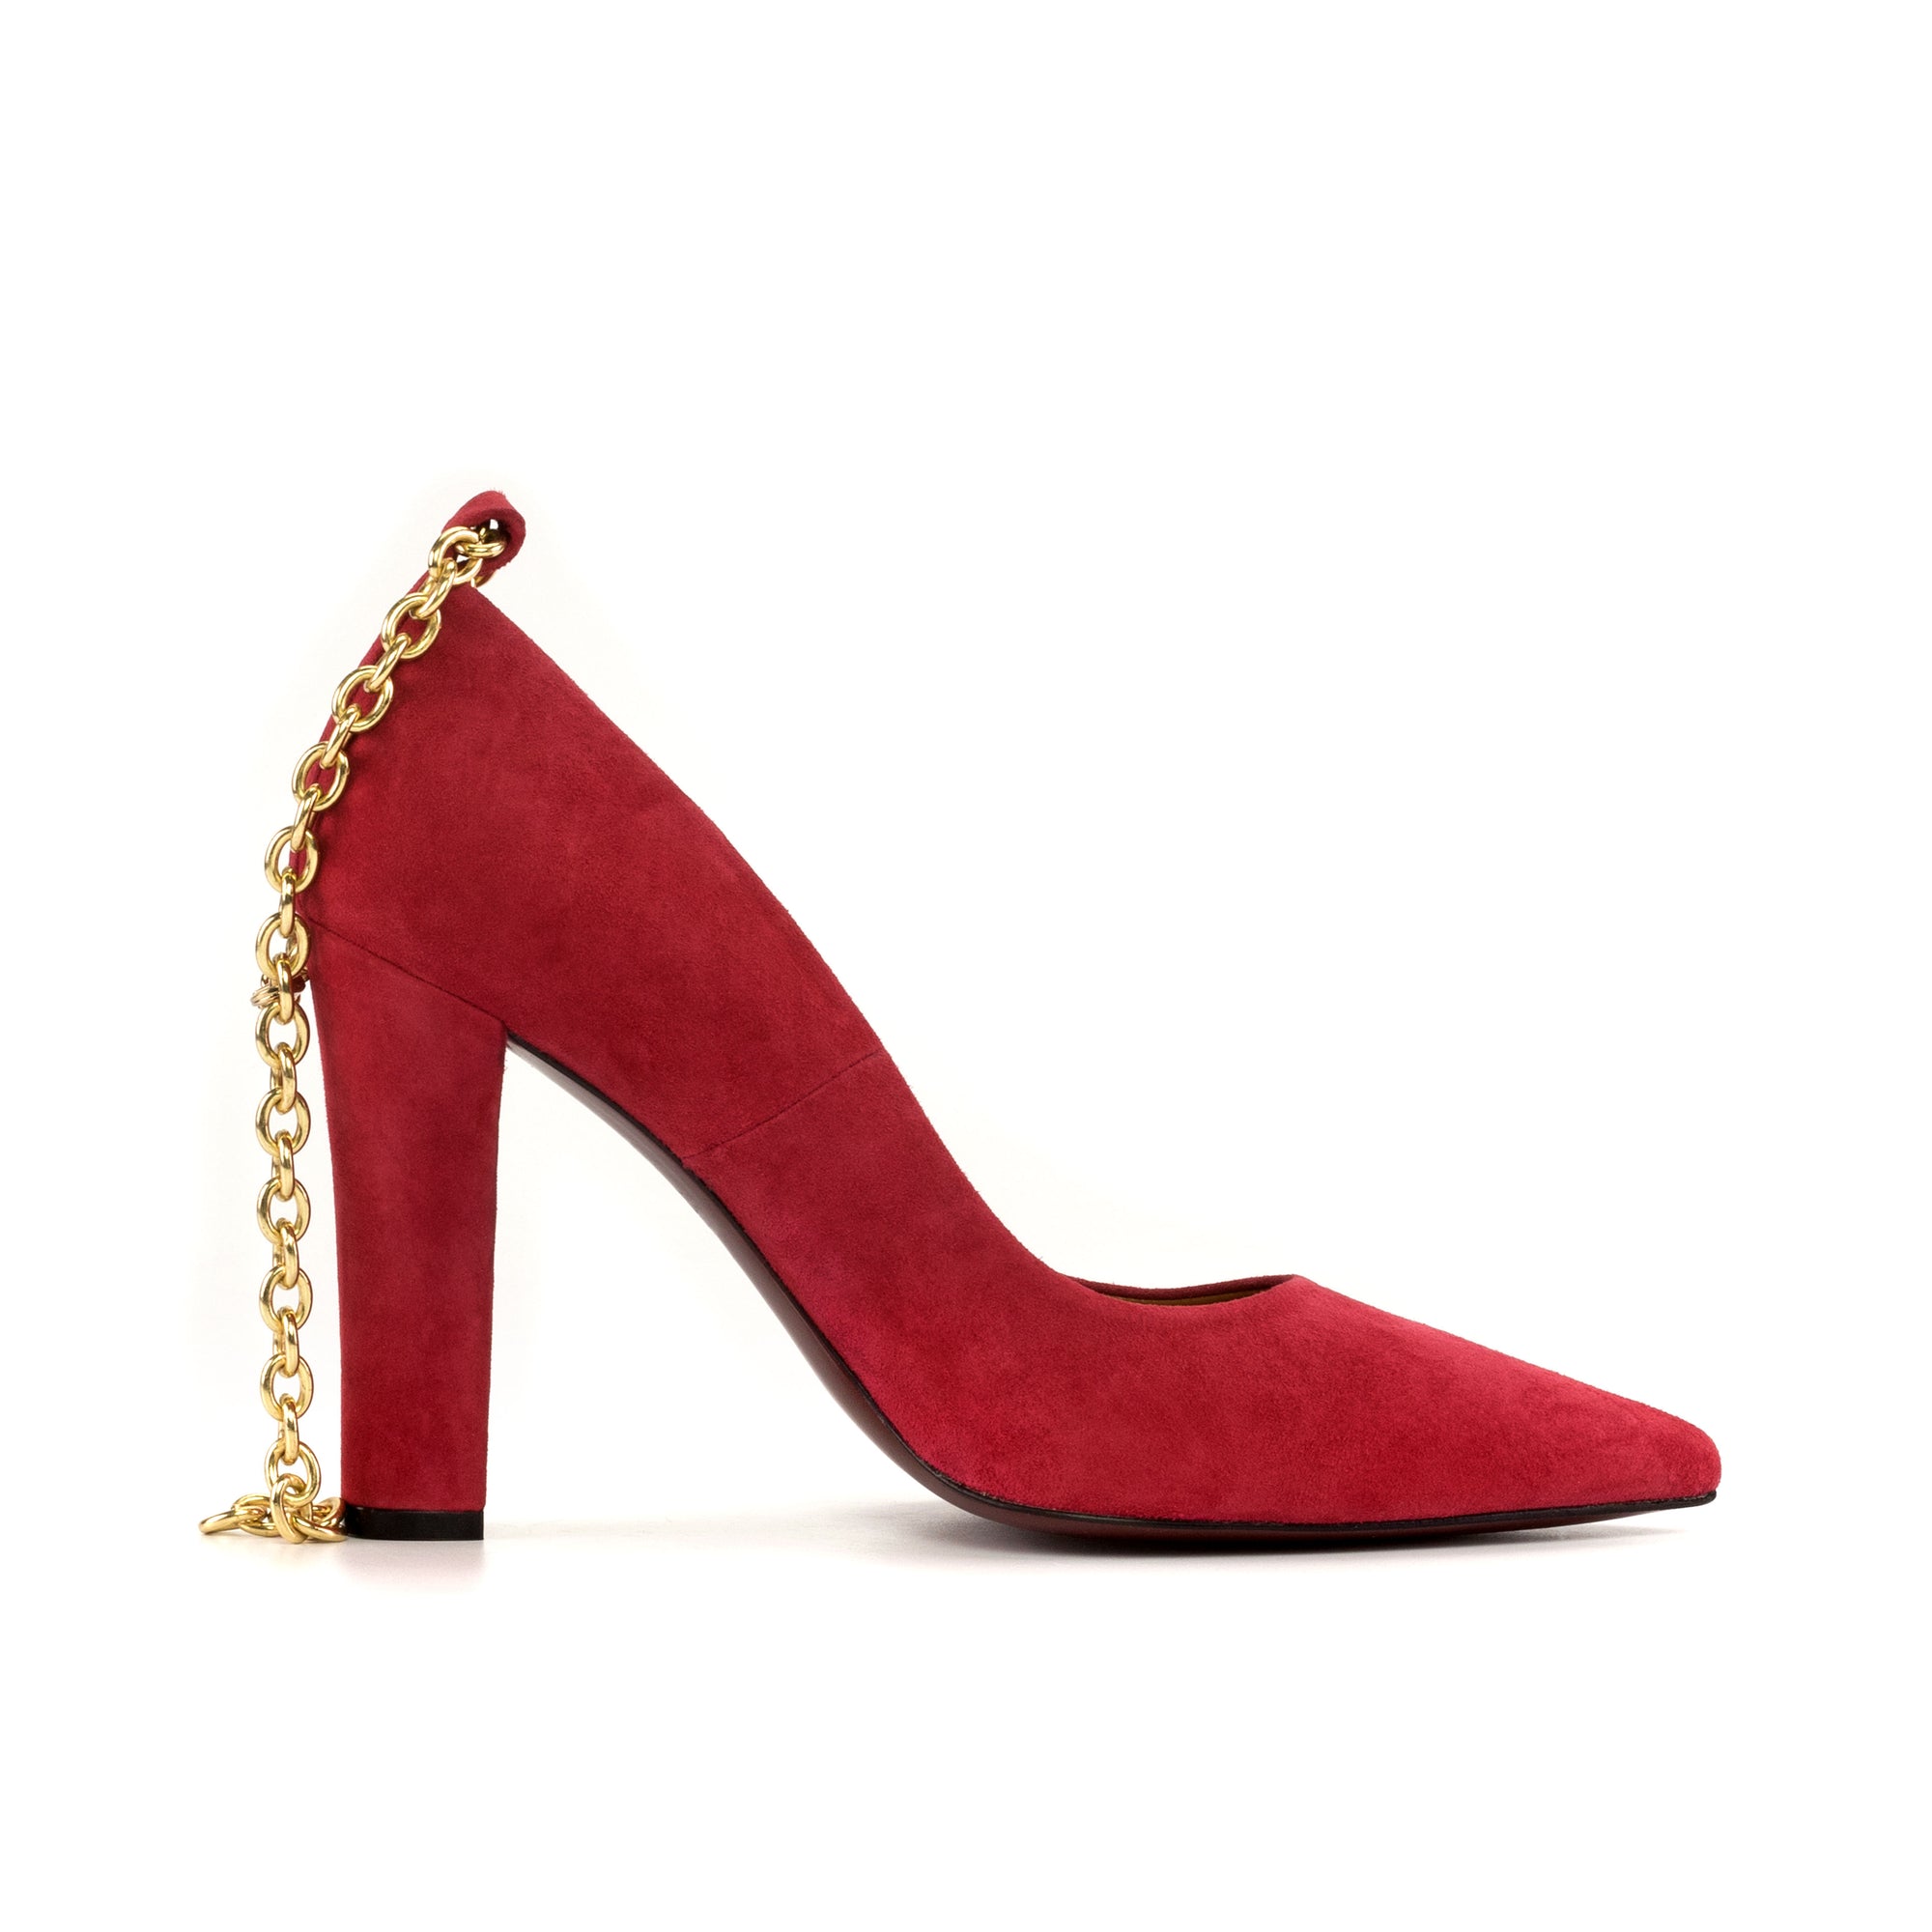 Red Suede High Heels with Gold Chain strap